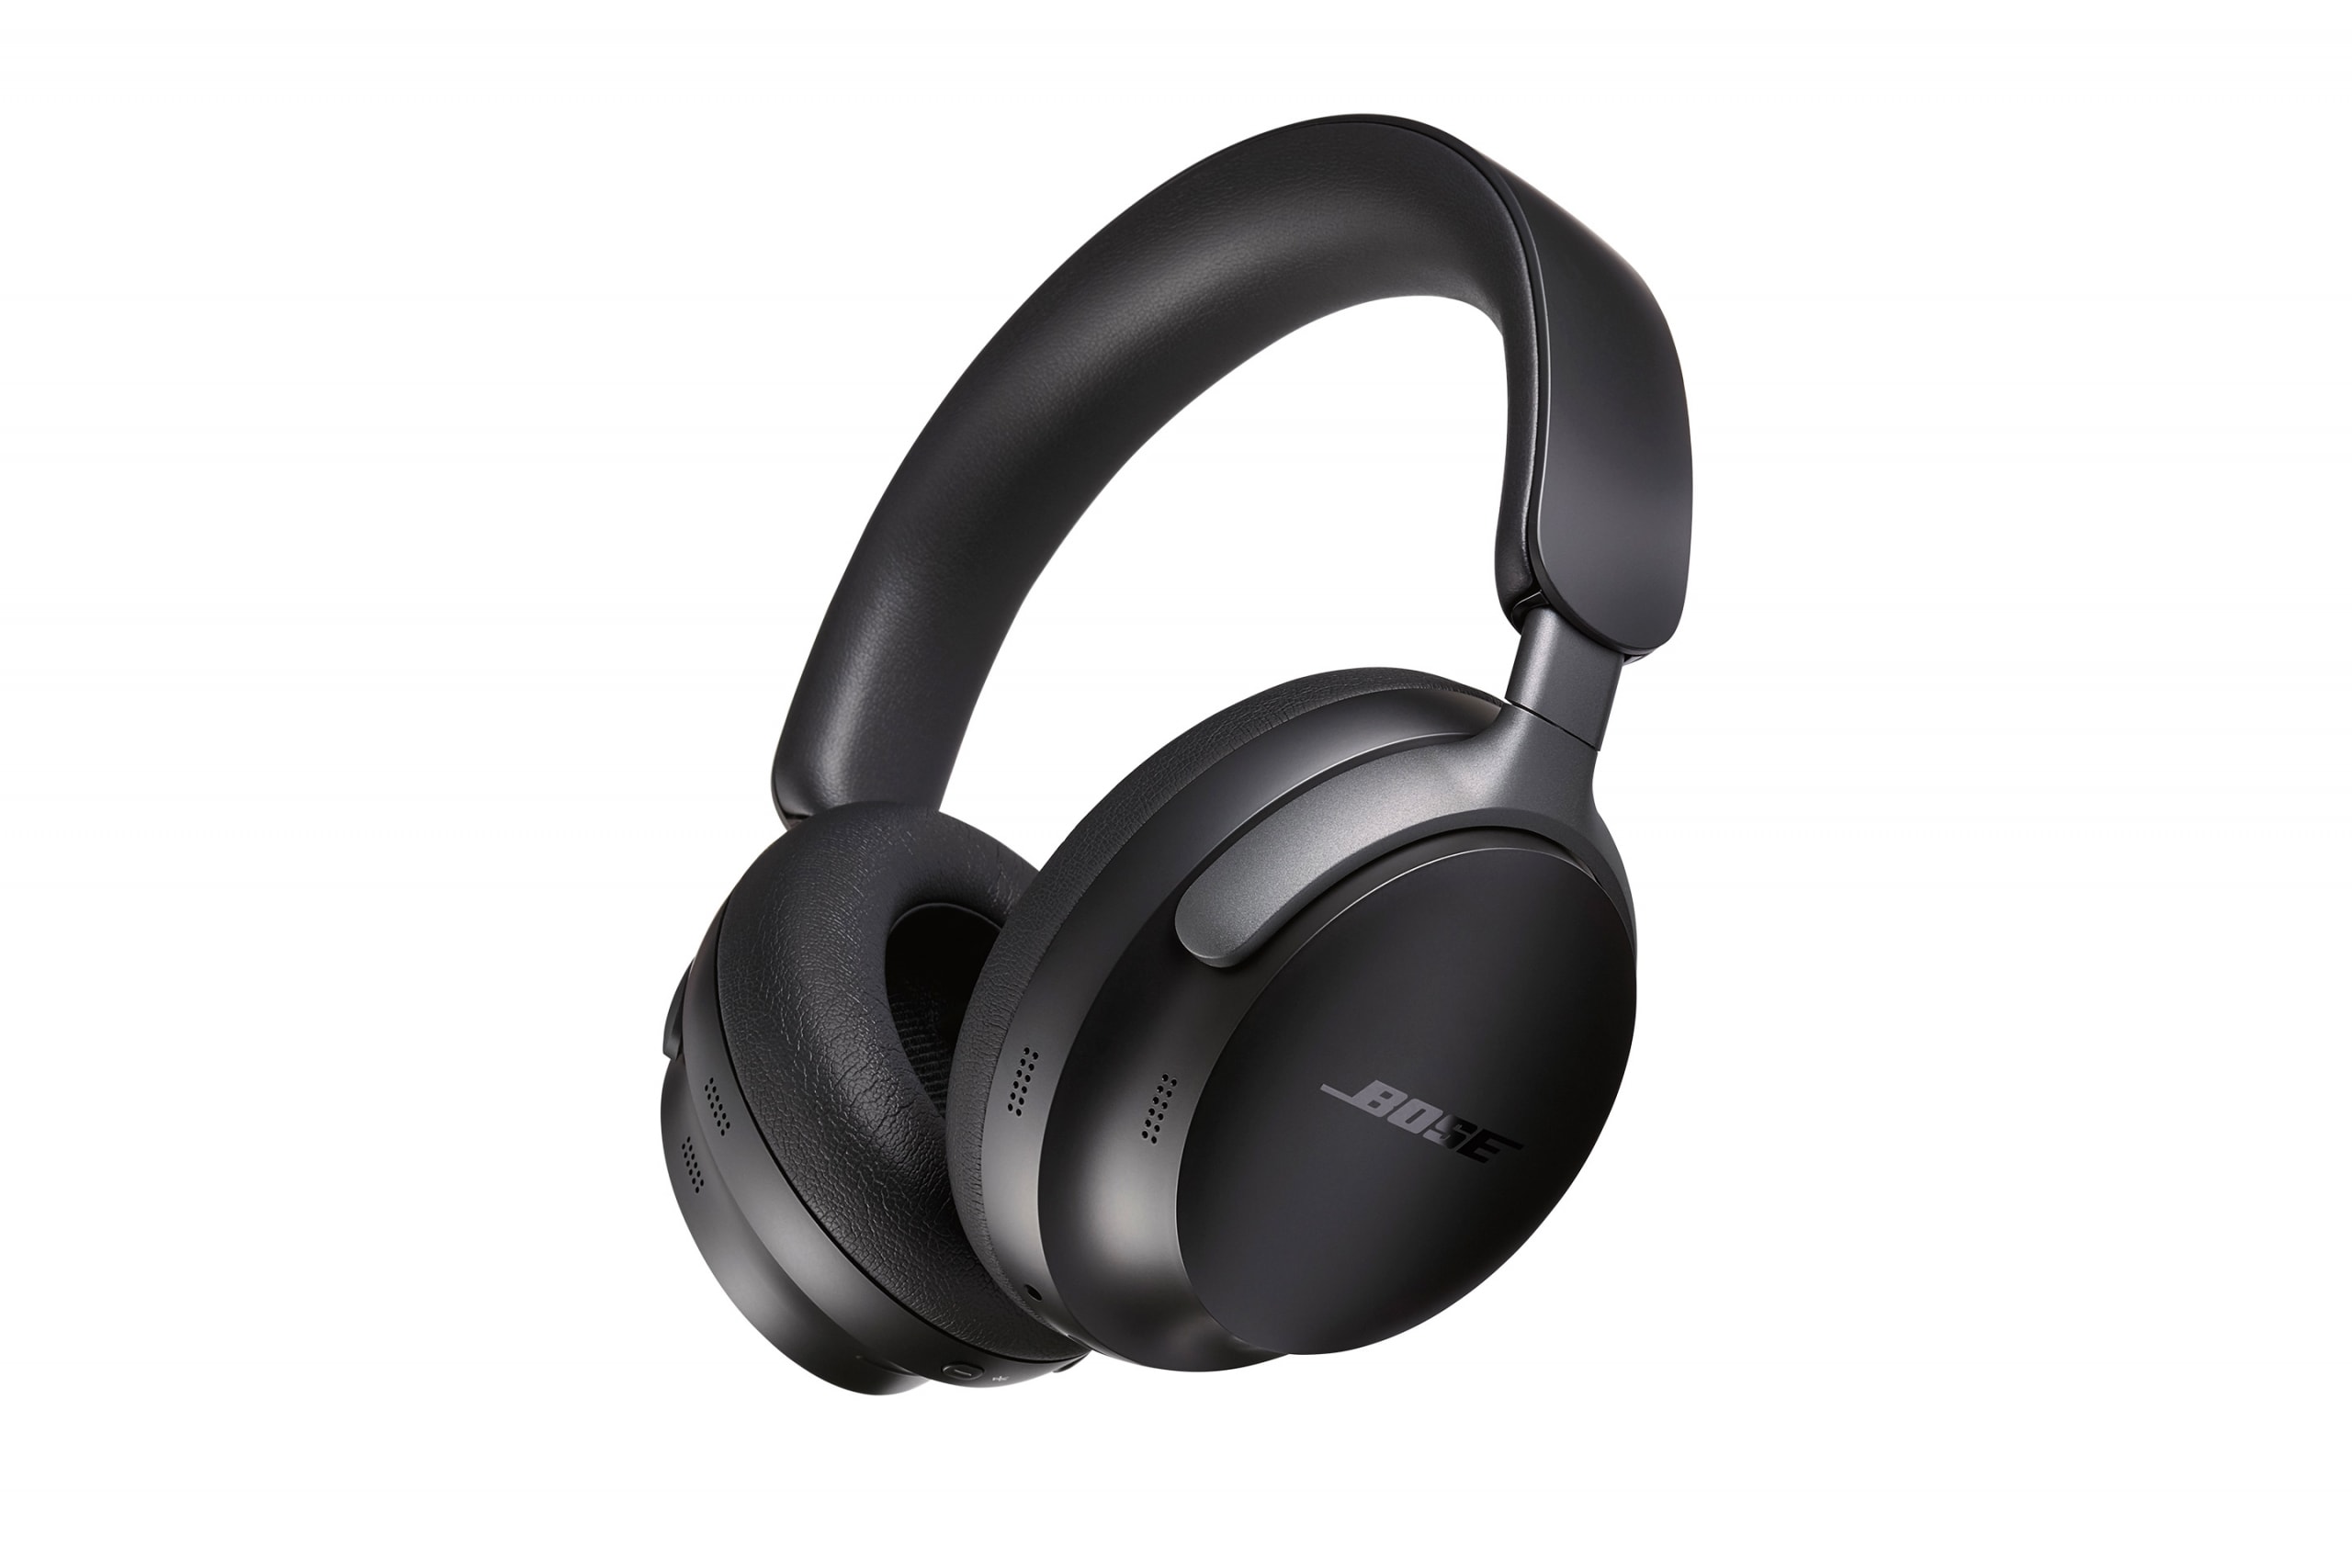 Bose's new Ultra headphones and earbuds get spatial audio